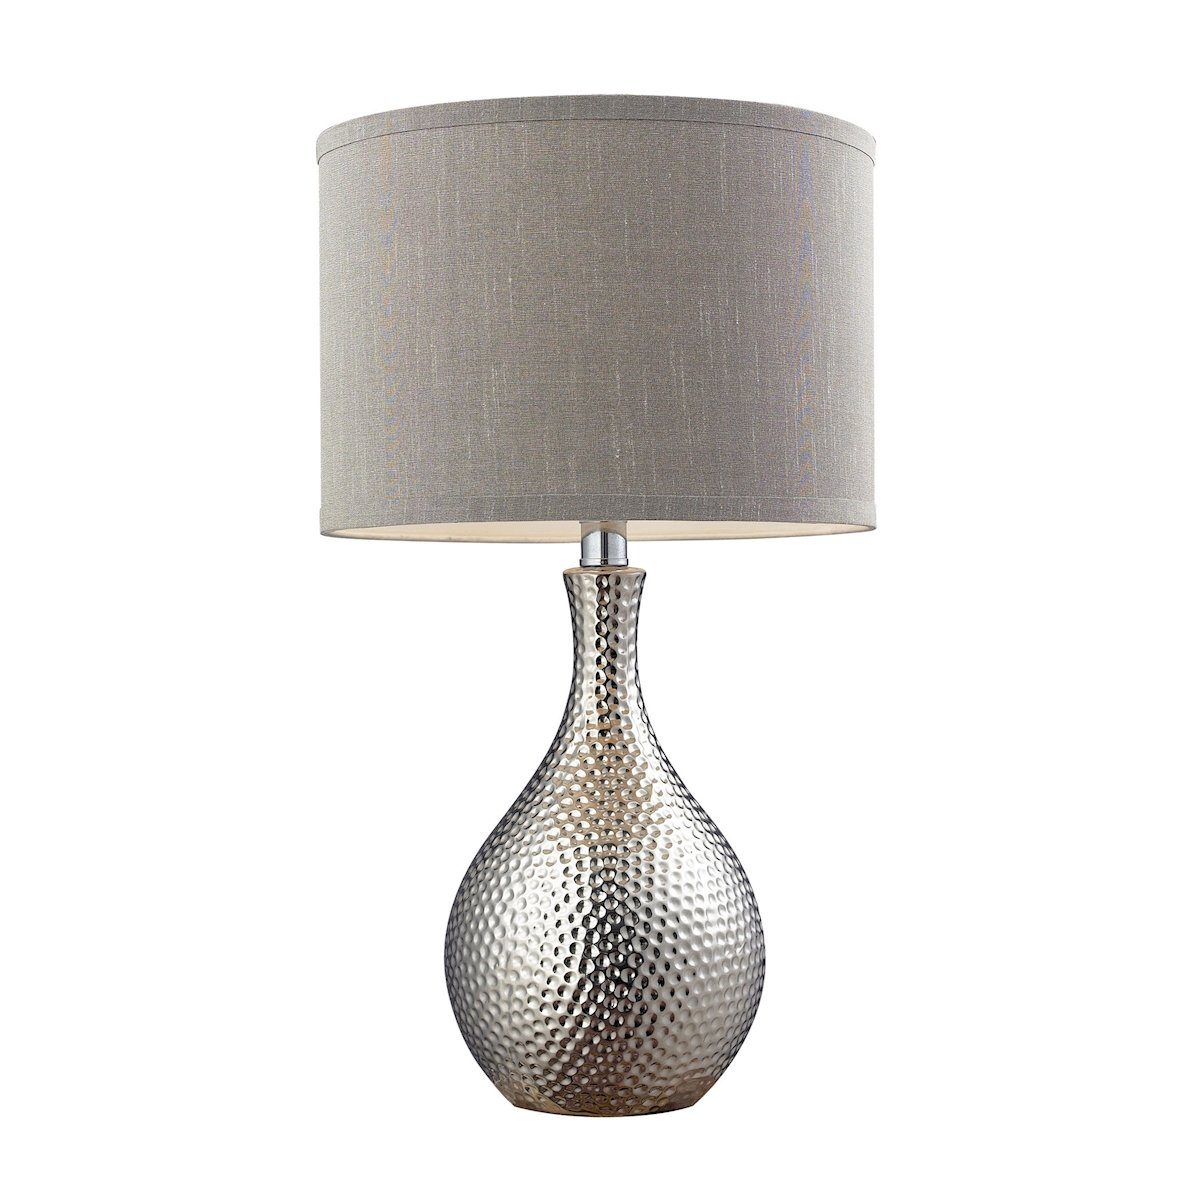 Hammered Chrome 22"h Table Lamp with Grey Shade Lamps Dimond Lighting 